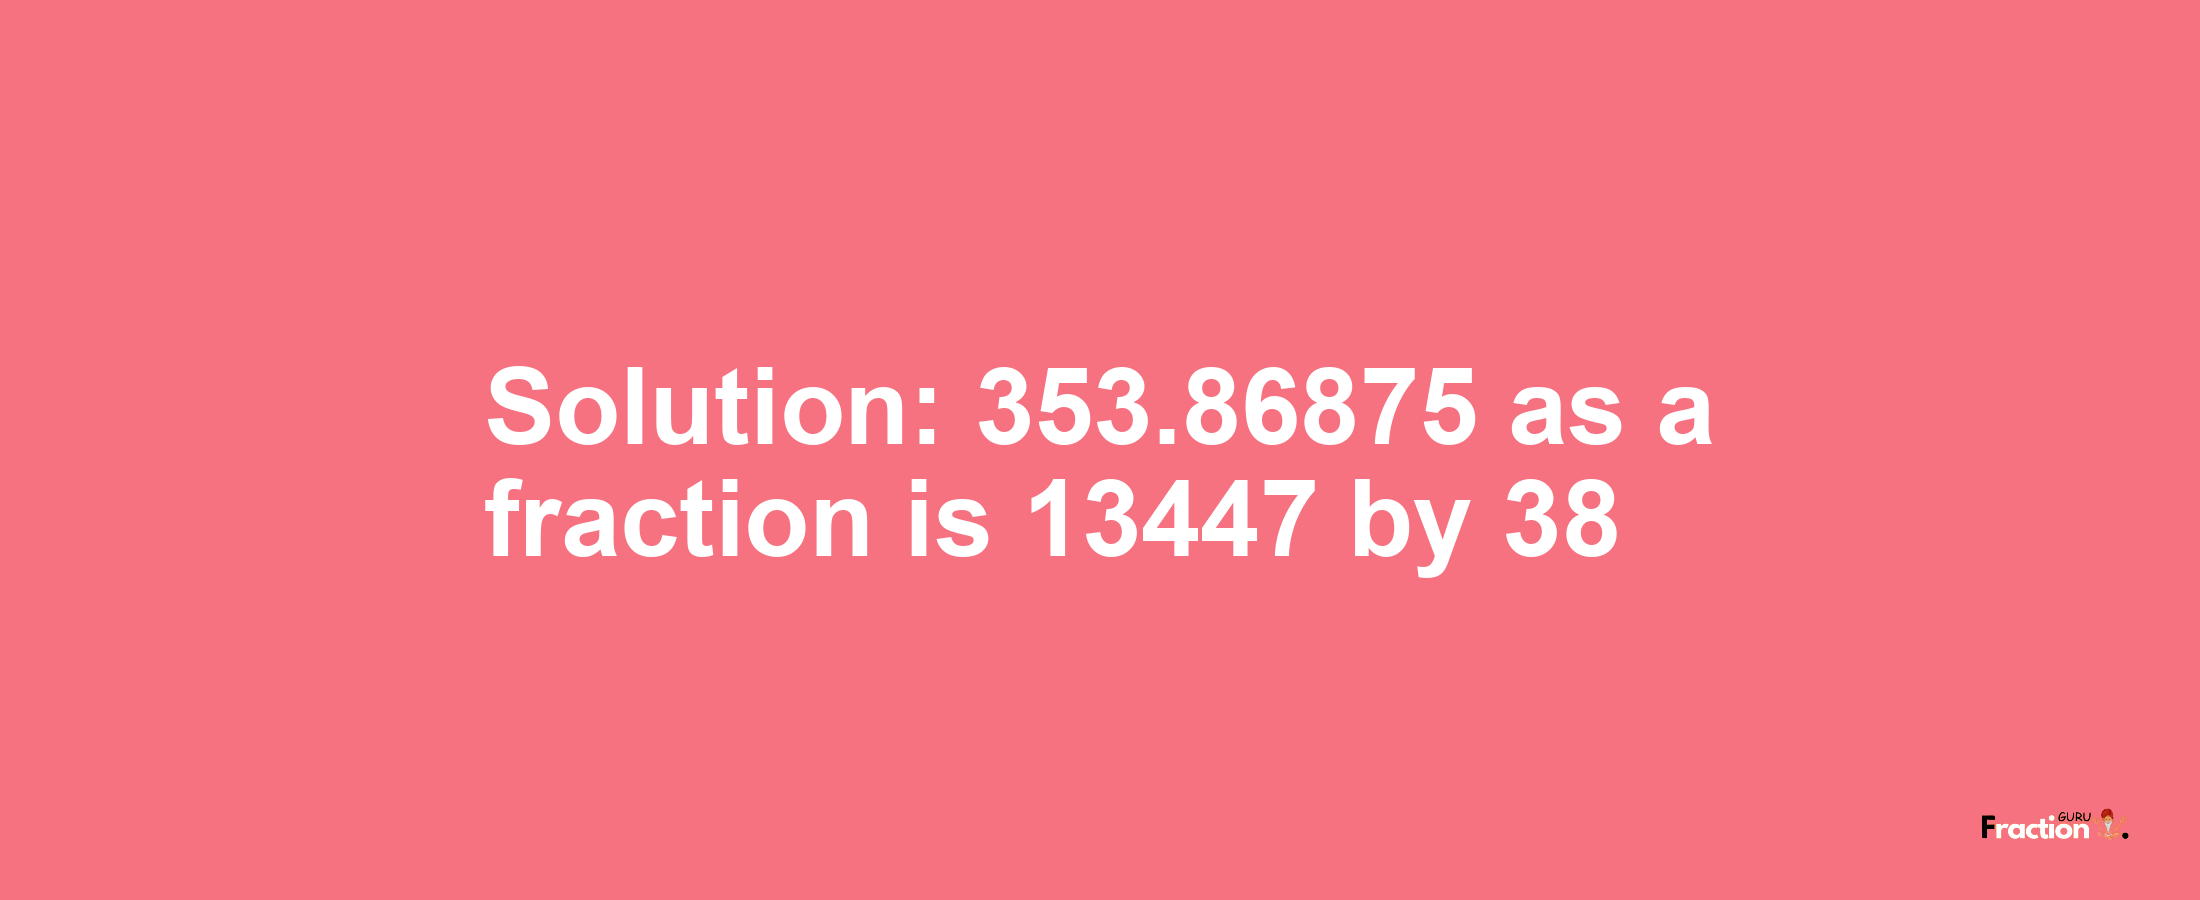 Solution:353.86875 as a fraction is 13447/38